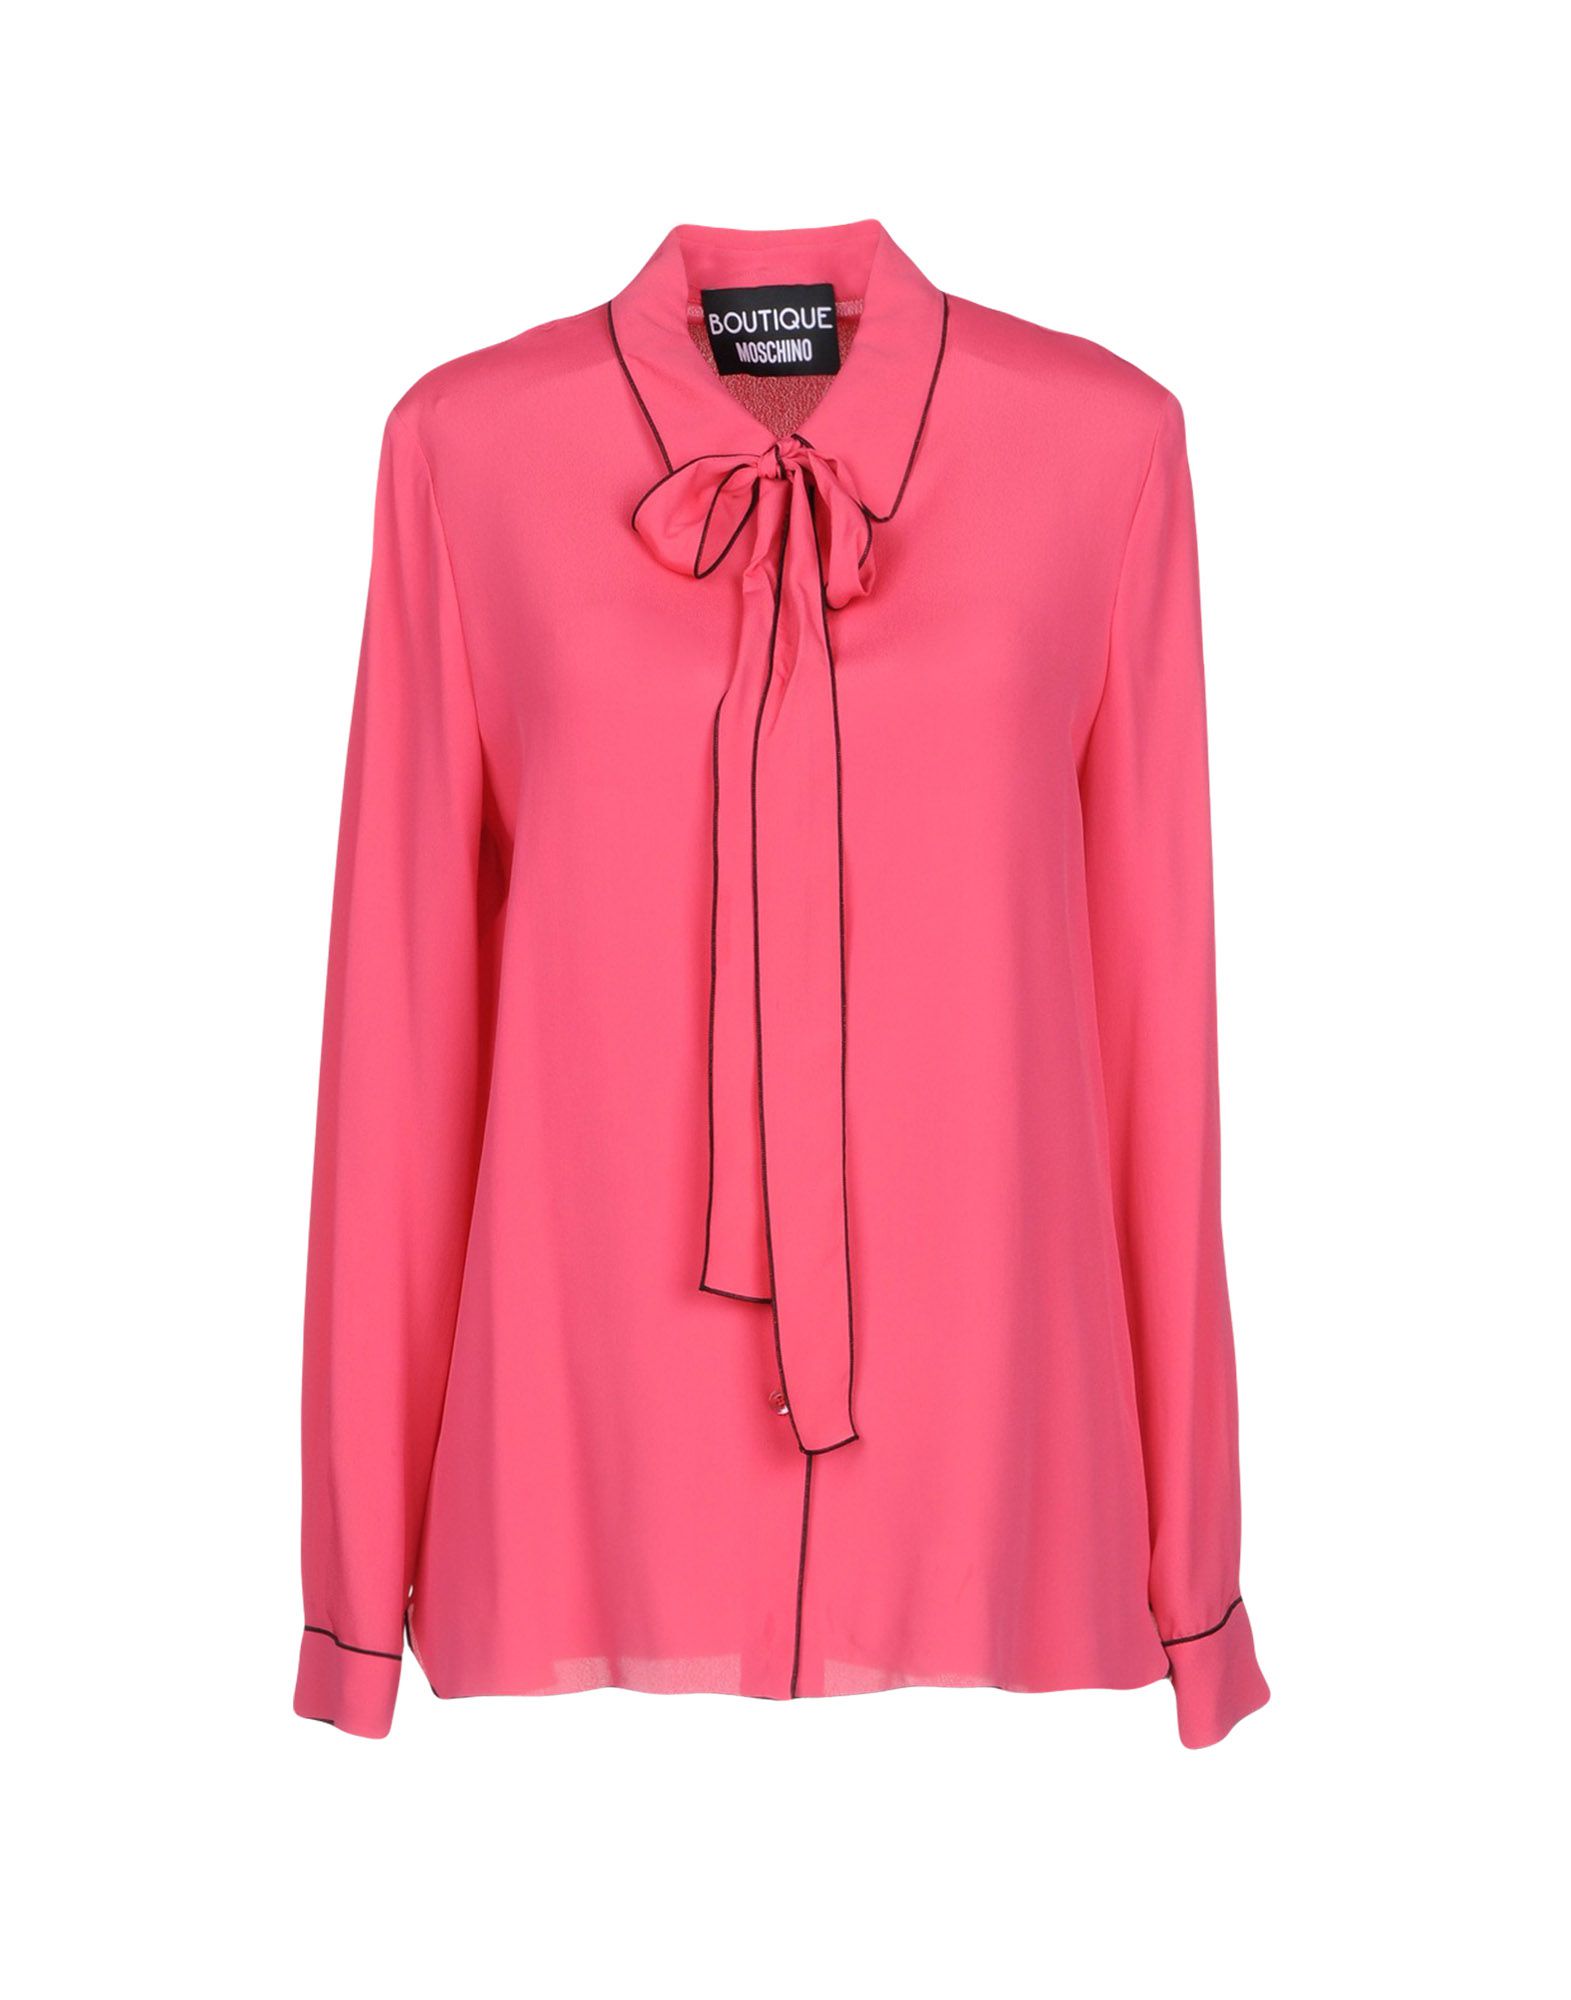 BOUTIQUE MOSCHINO Solid colour shirts & blouses,38720990AM 4